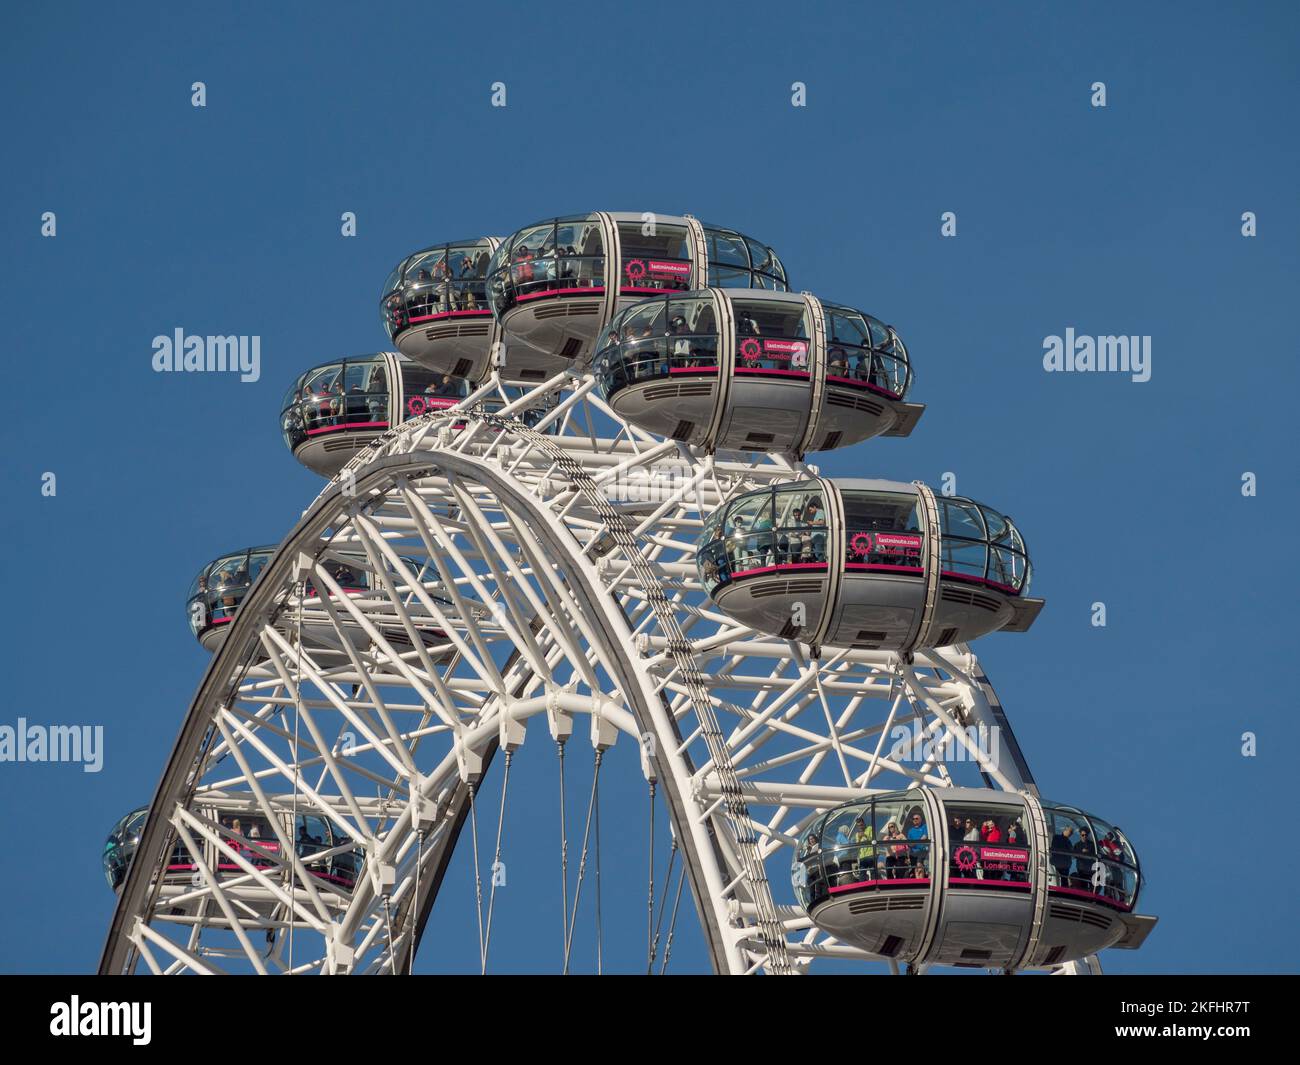 Close up view of the passenger pods on the London Eye, London, UK. Stock Photo